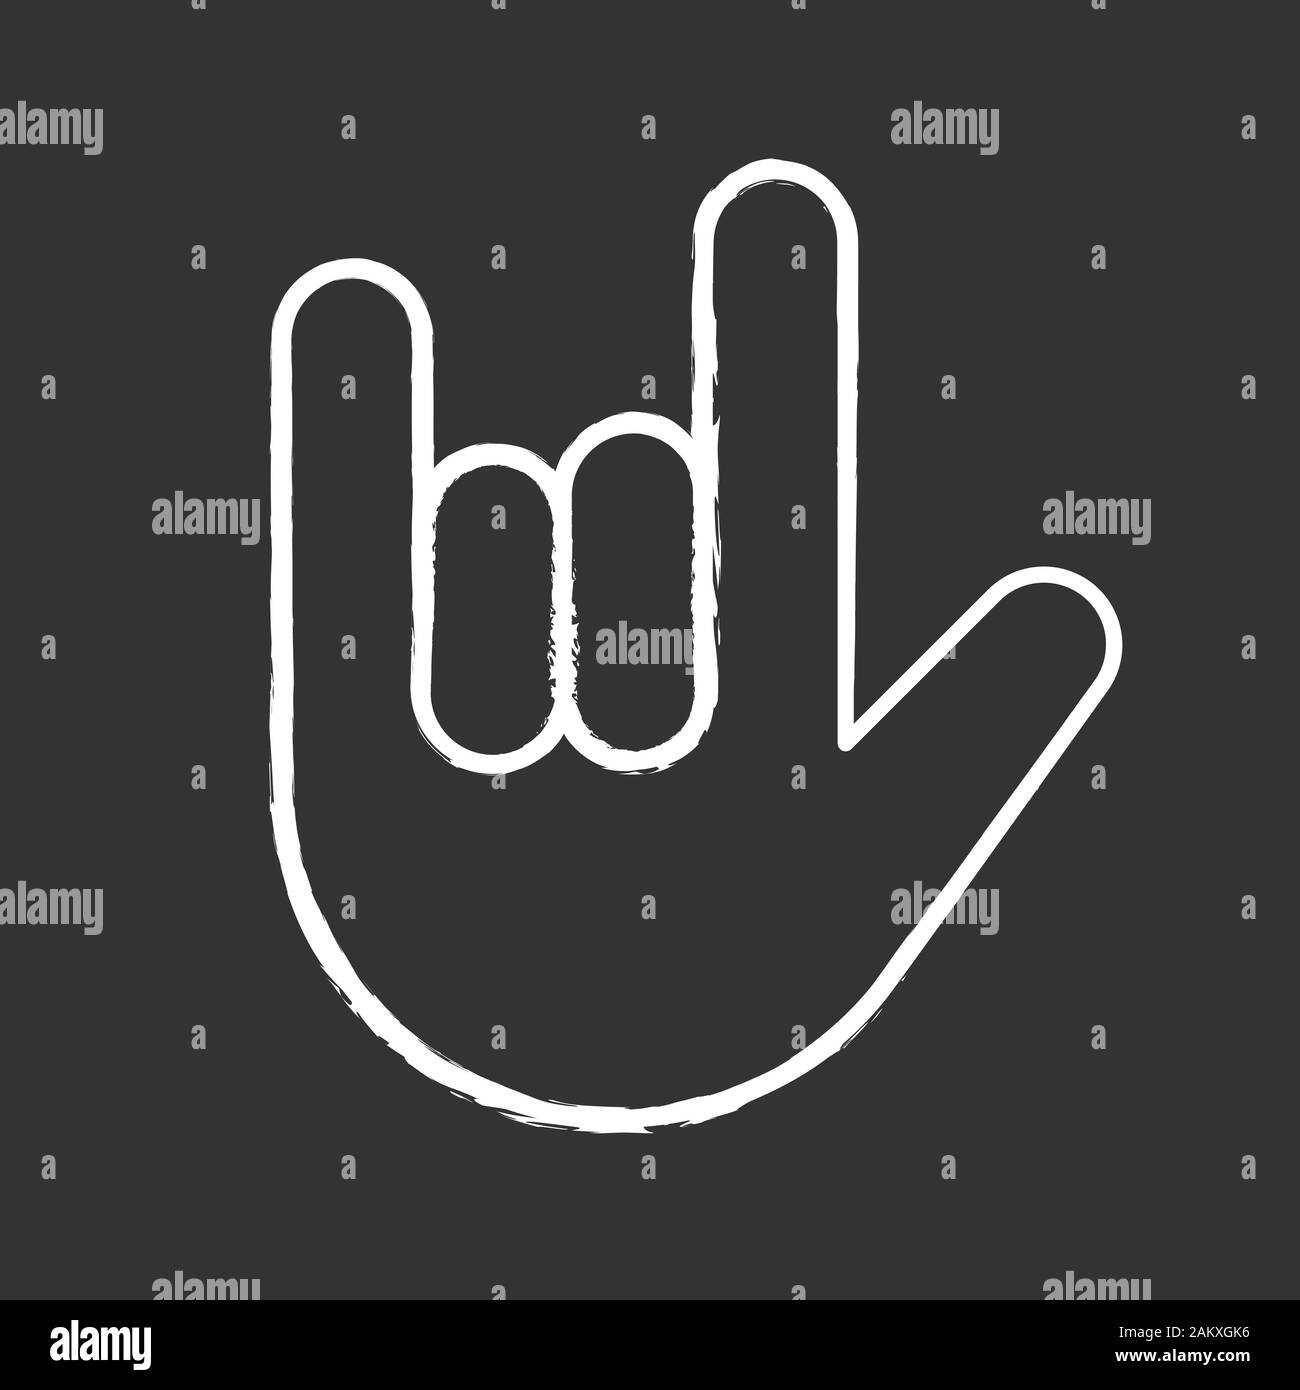 Love you hand gesture chalk icon. Rock on. Horns emoji. Devil fingers. Heavy metal. Roll sign. Isolated vector chalkboard illustration Stock Vector